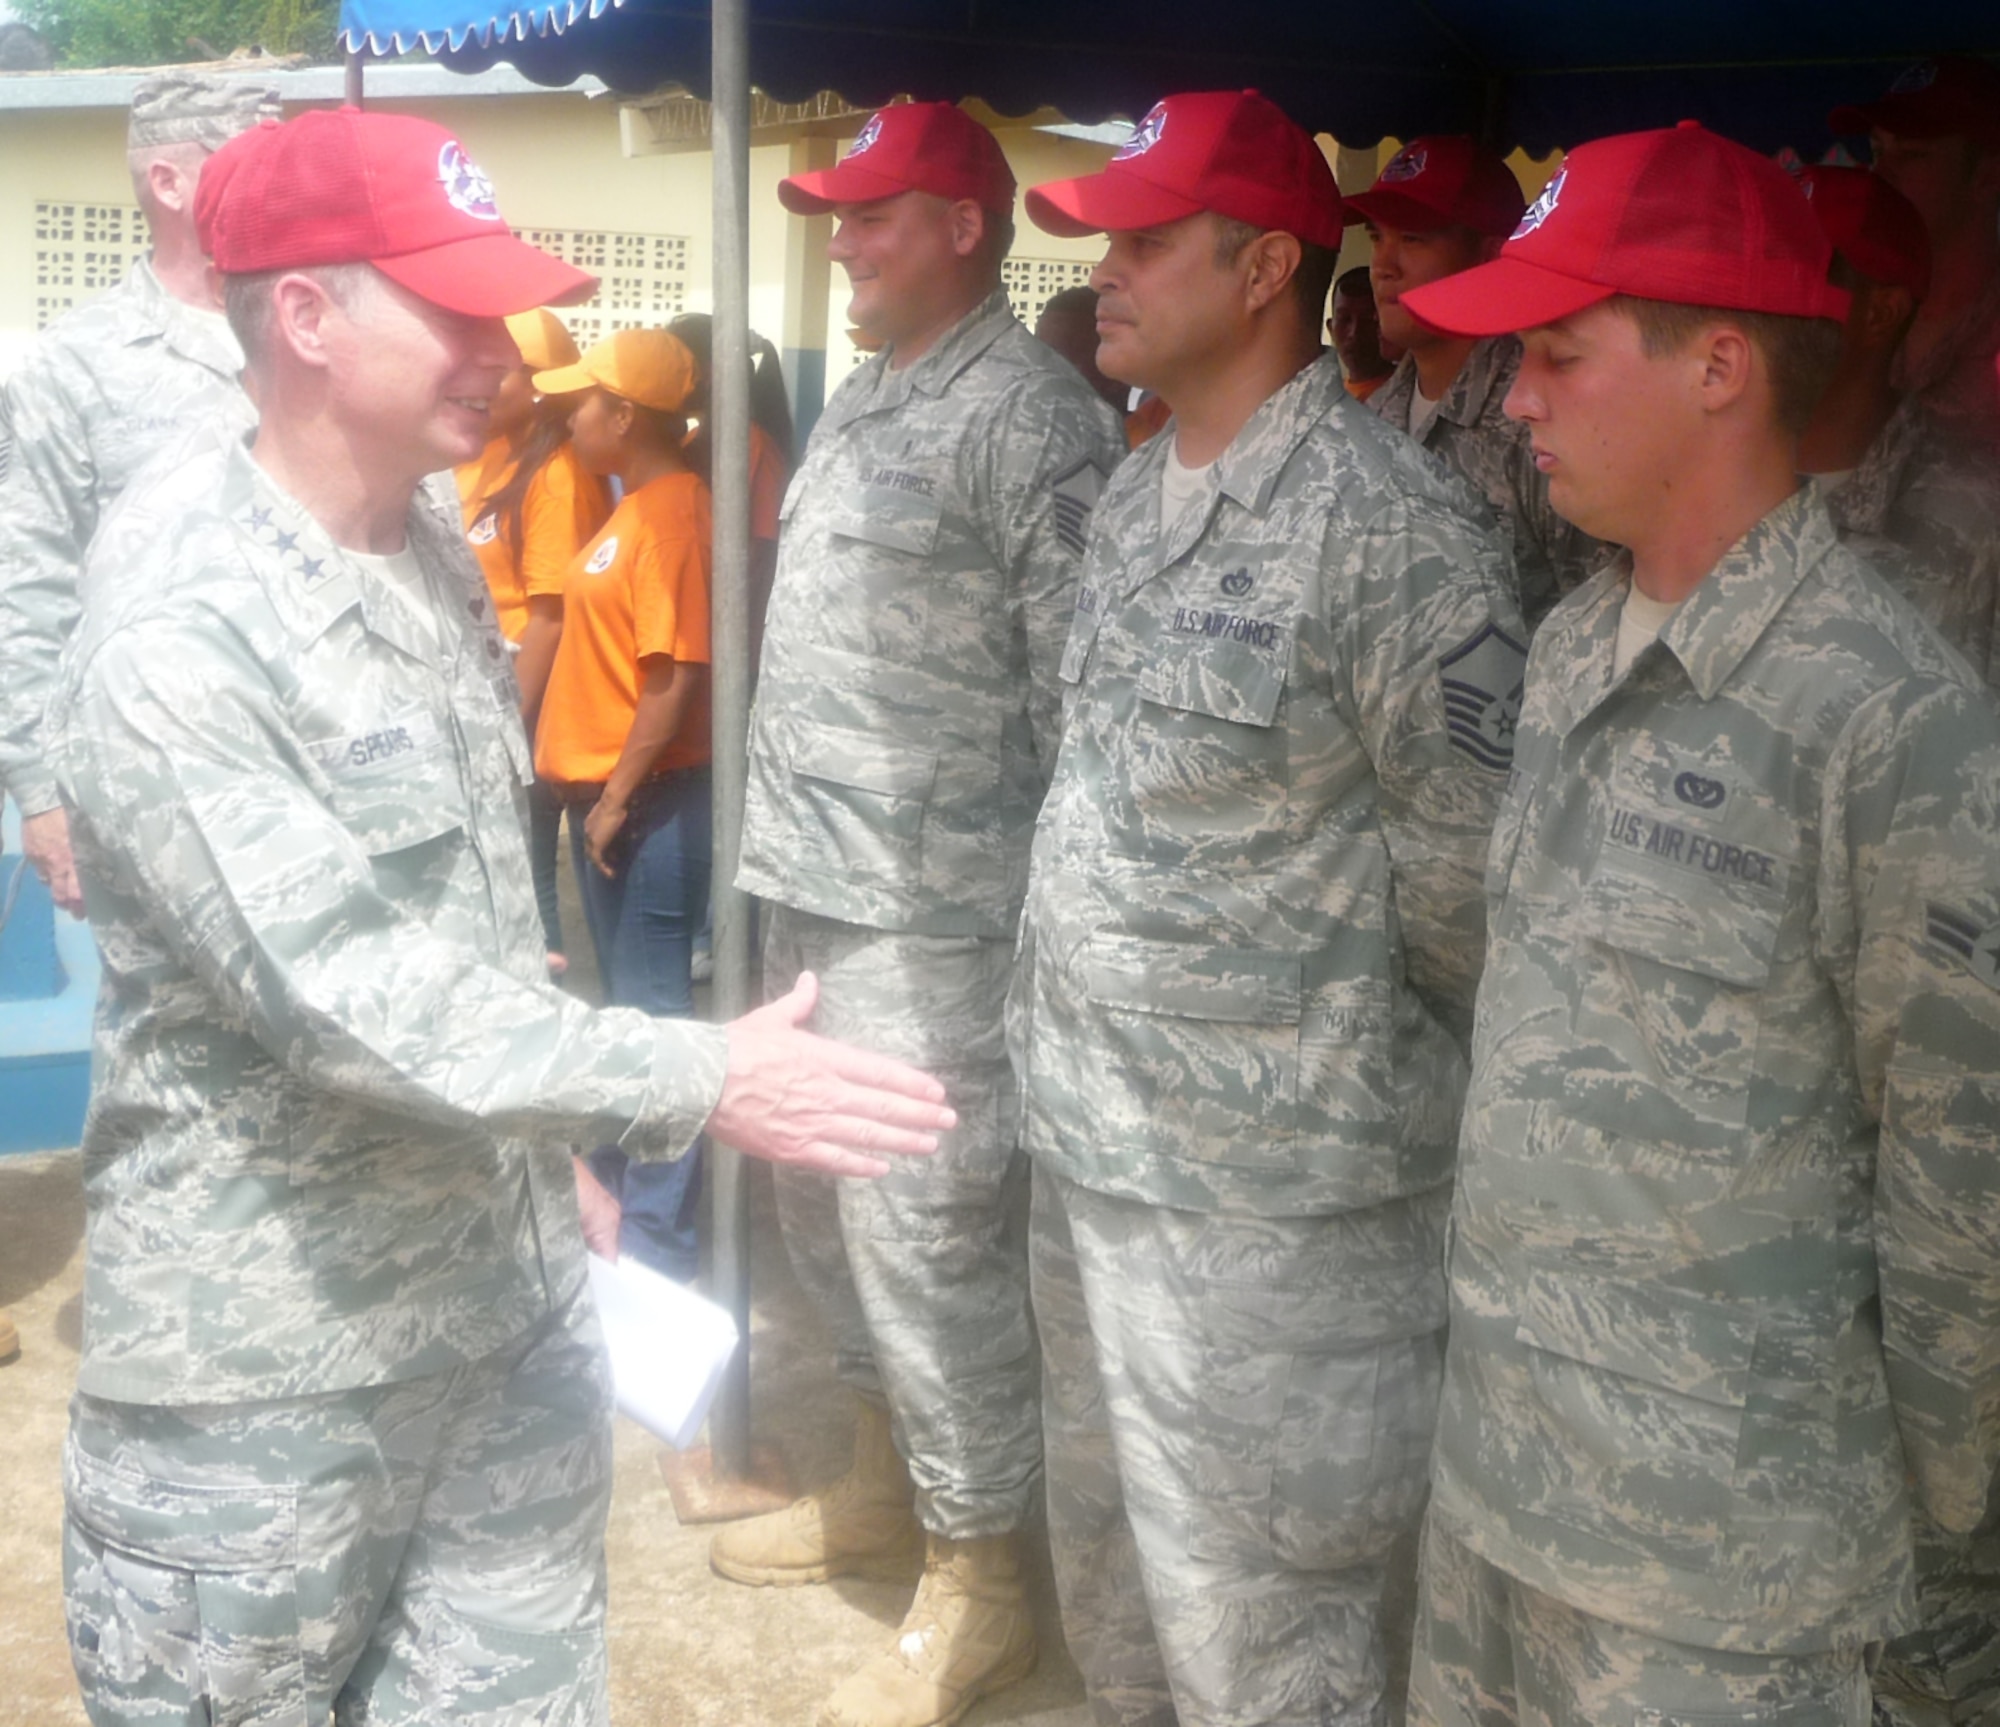 METETI, Panama -- Lt. Gen. Glenn Spears, 12th Air Force (Air Forces Southern) commander, shakes hands with Airmen from the 820th Expeditionary RED HORSE Squadron during the New Horizons Panama 2010 closing ceremonies. (U.S. Air Force photo)